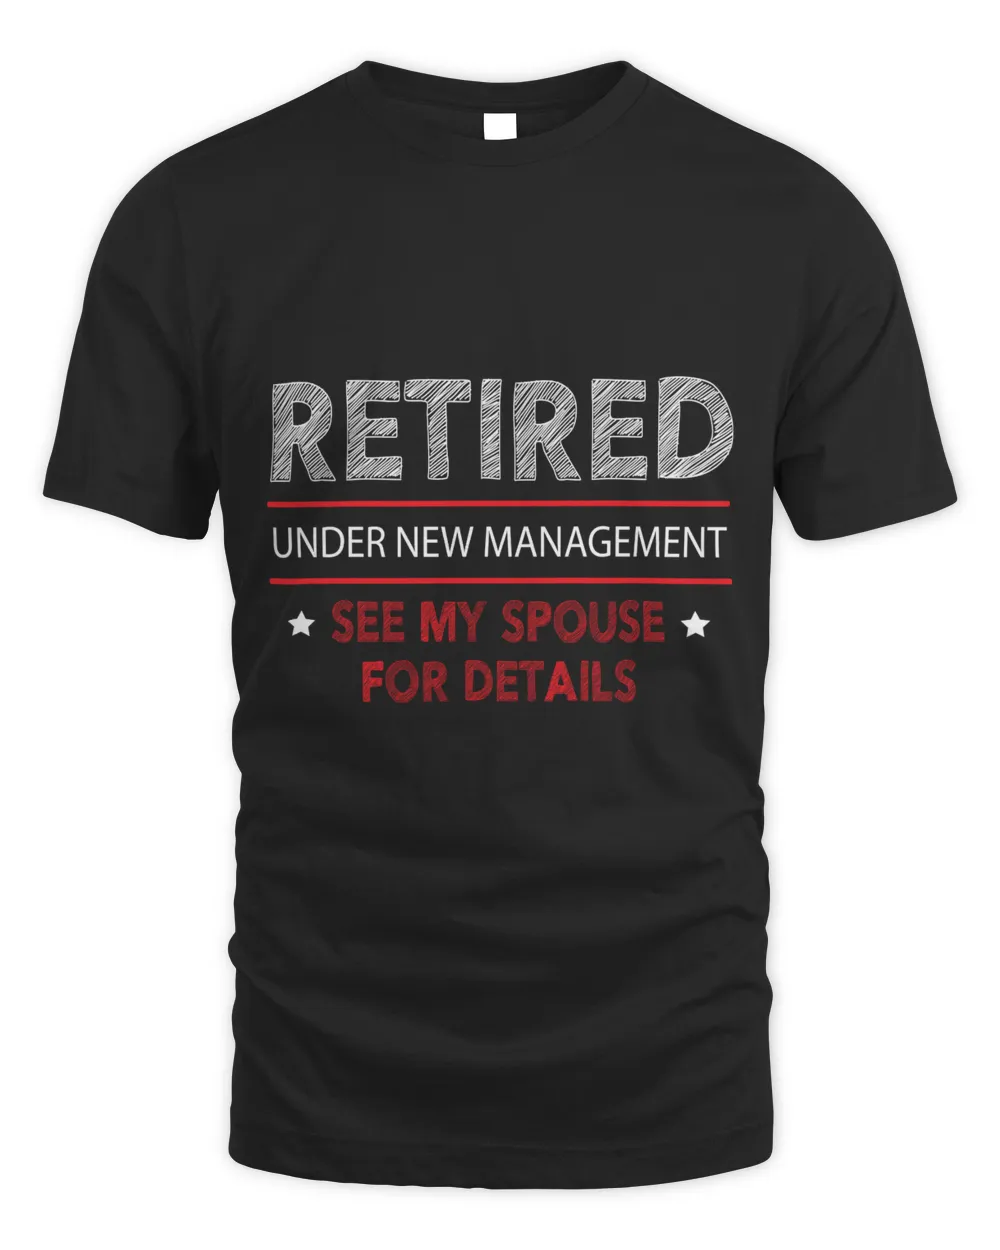 Retired under new management see spouse for details